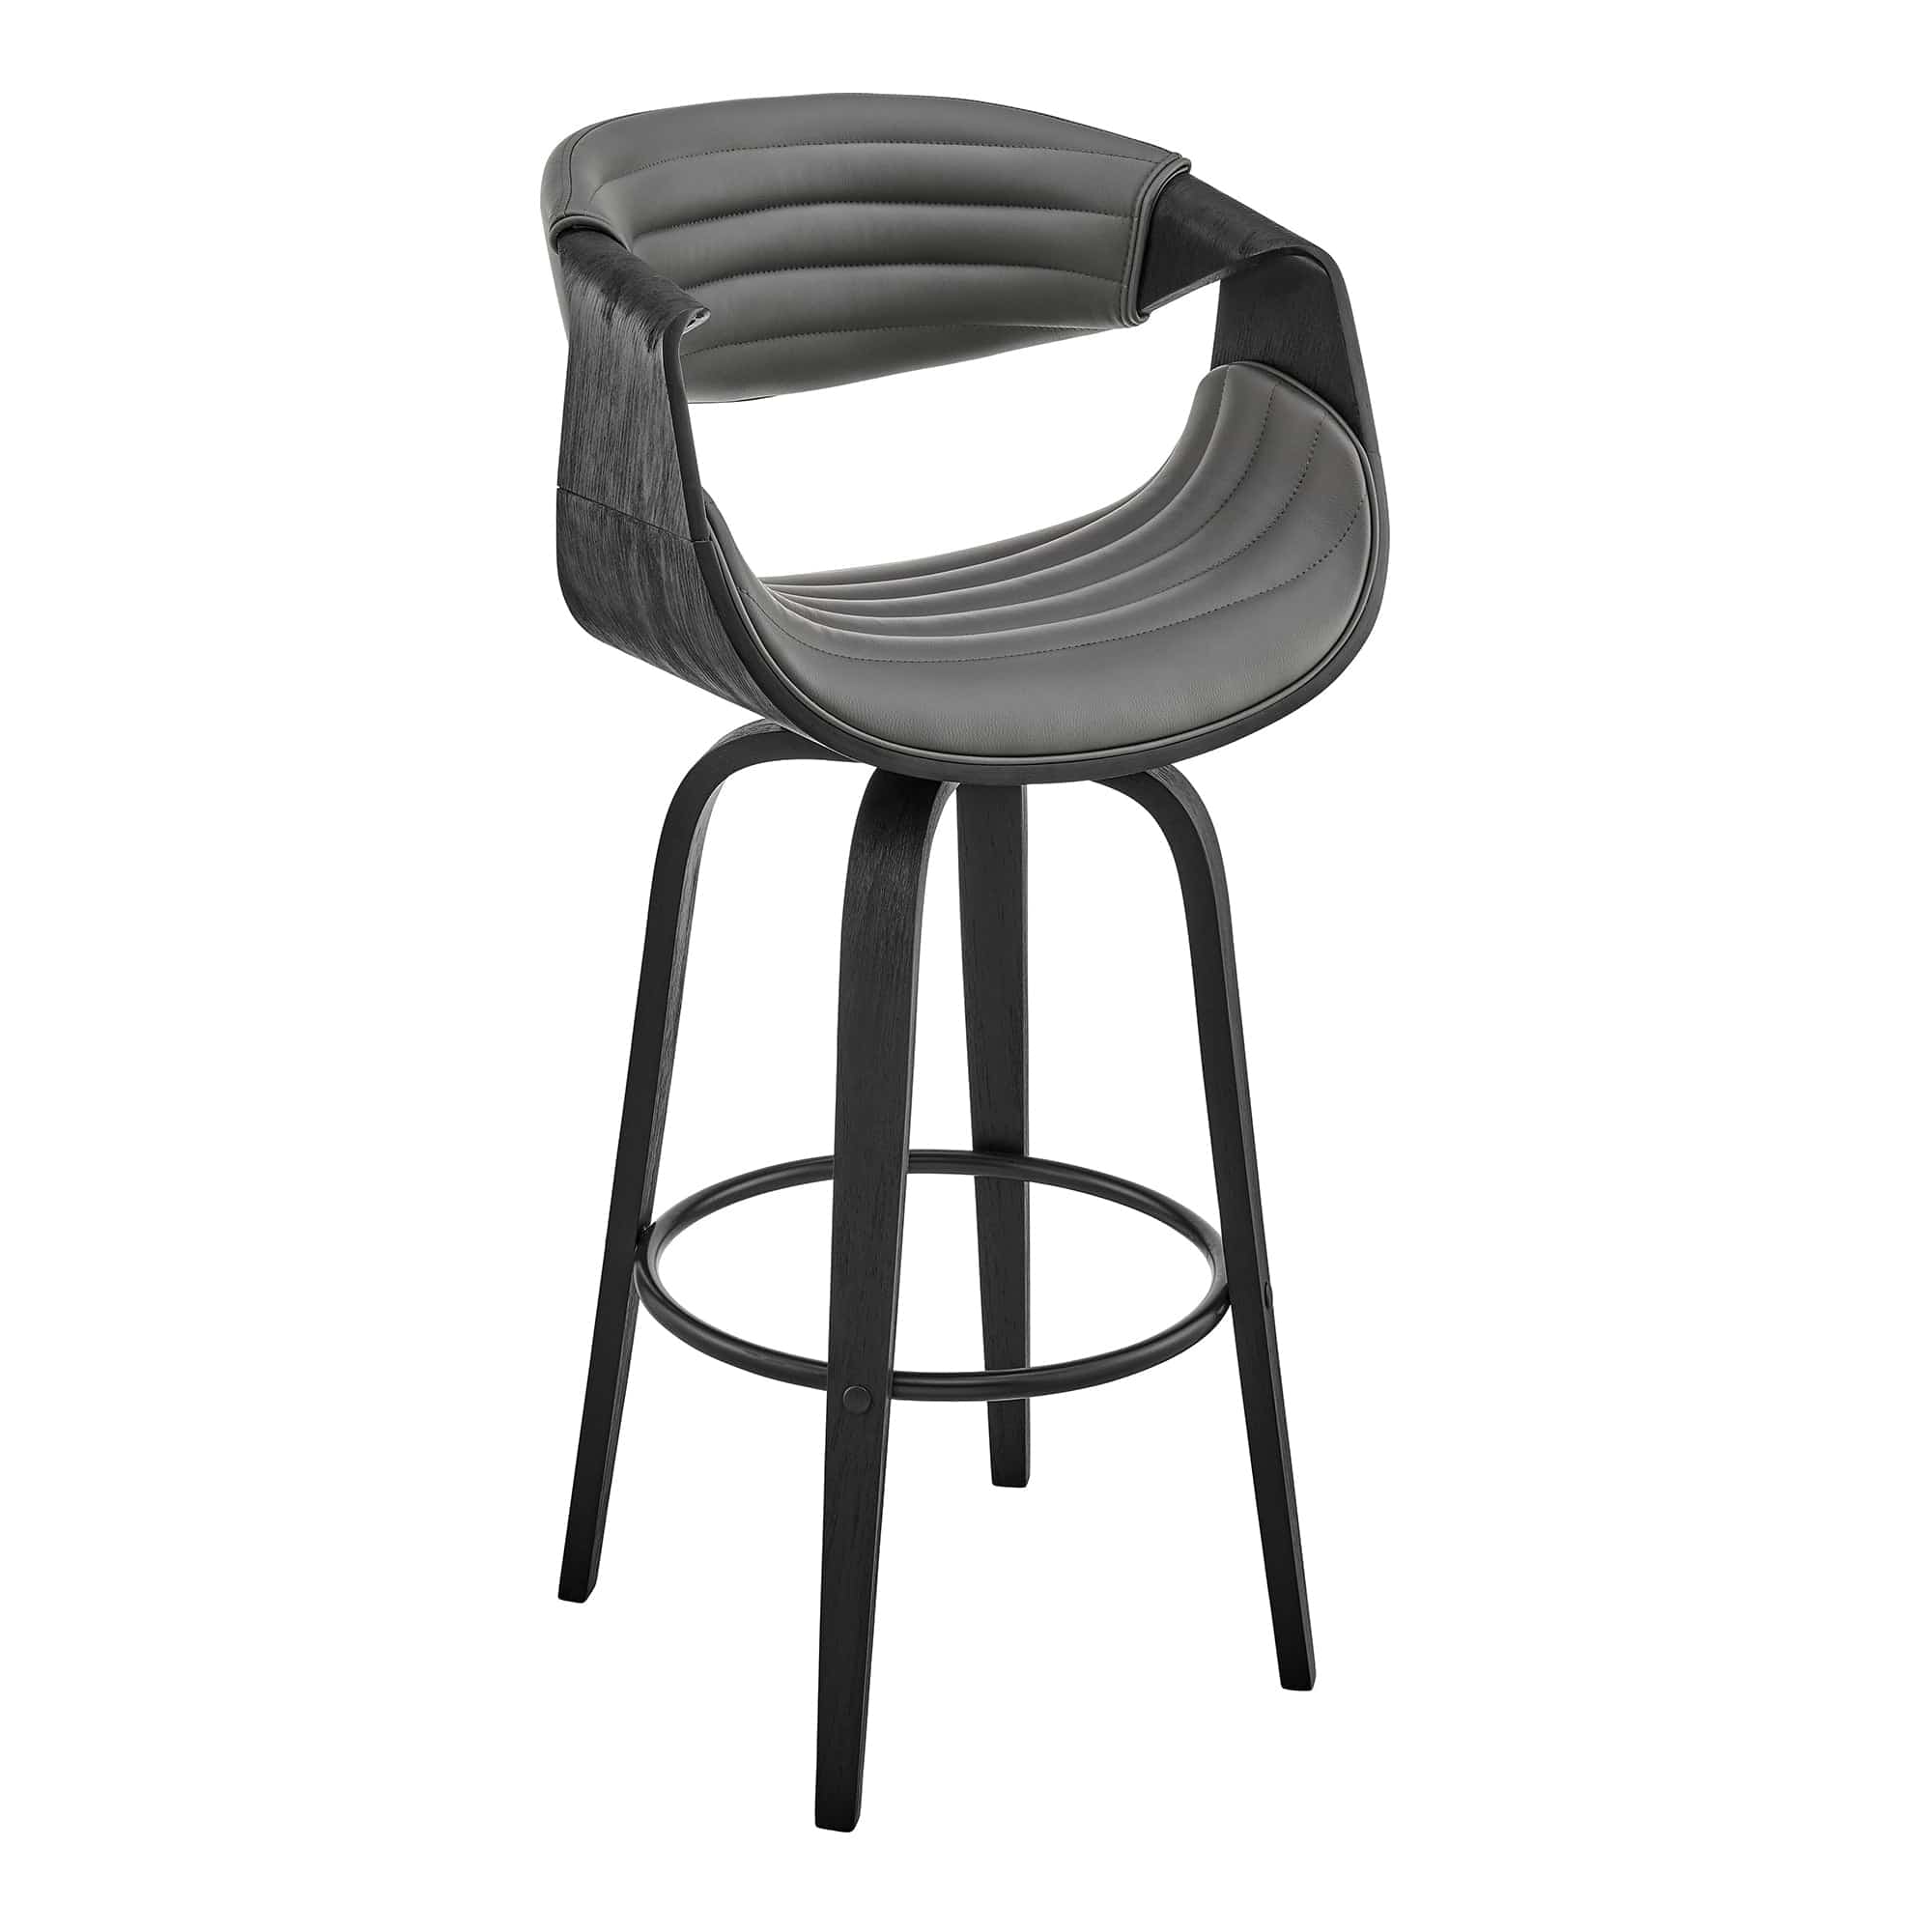 Armen Living Bar Stool Armen Living | Arya 26" Swivel Counter Stool in Gray Faux Leather and Black Wood | LCAYBABLGR26